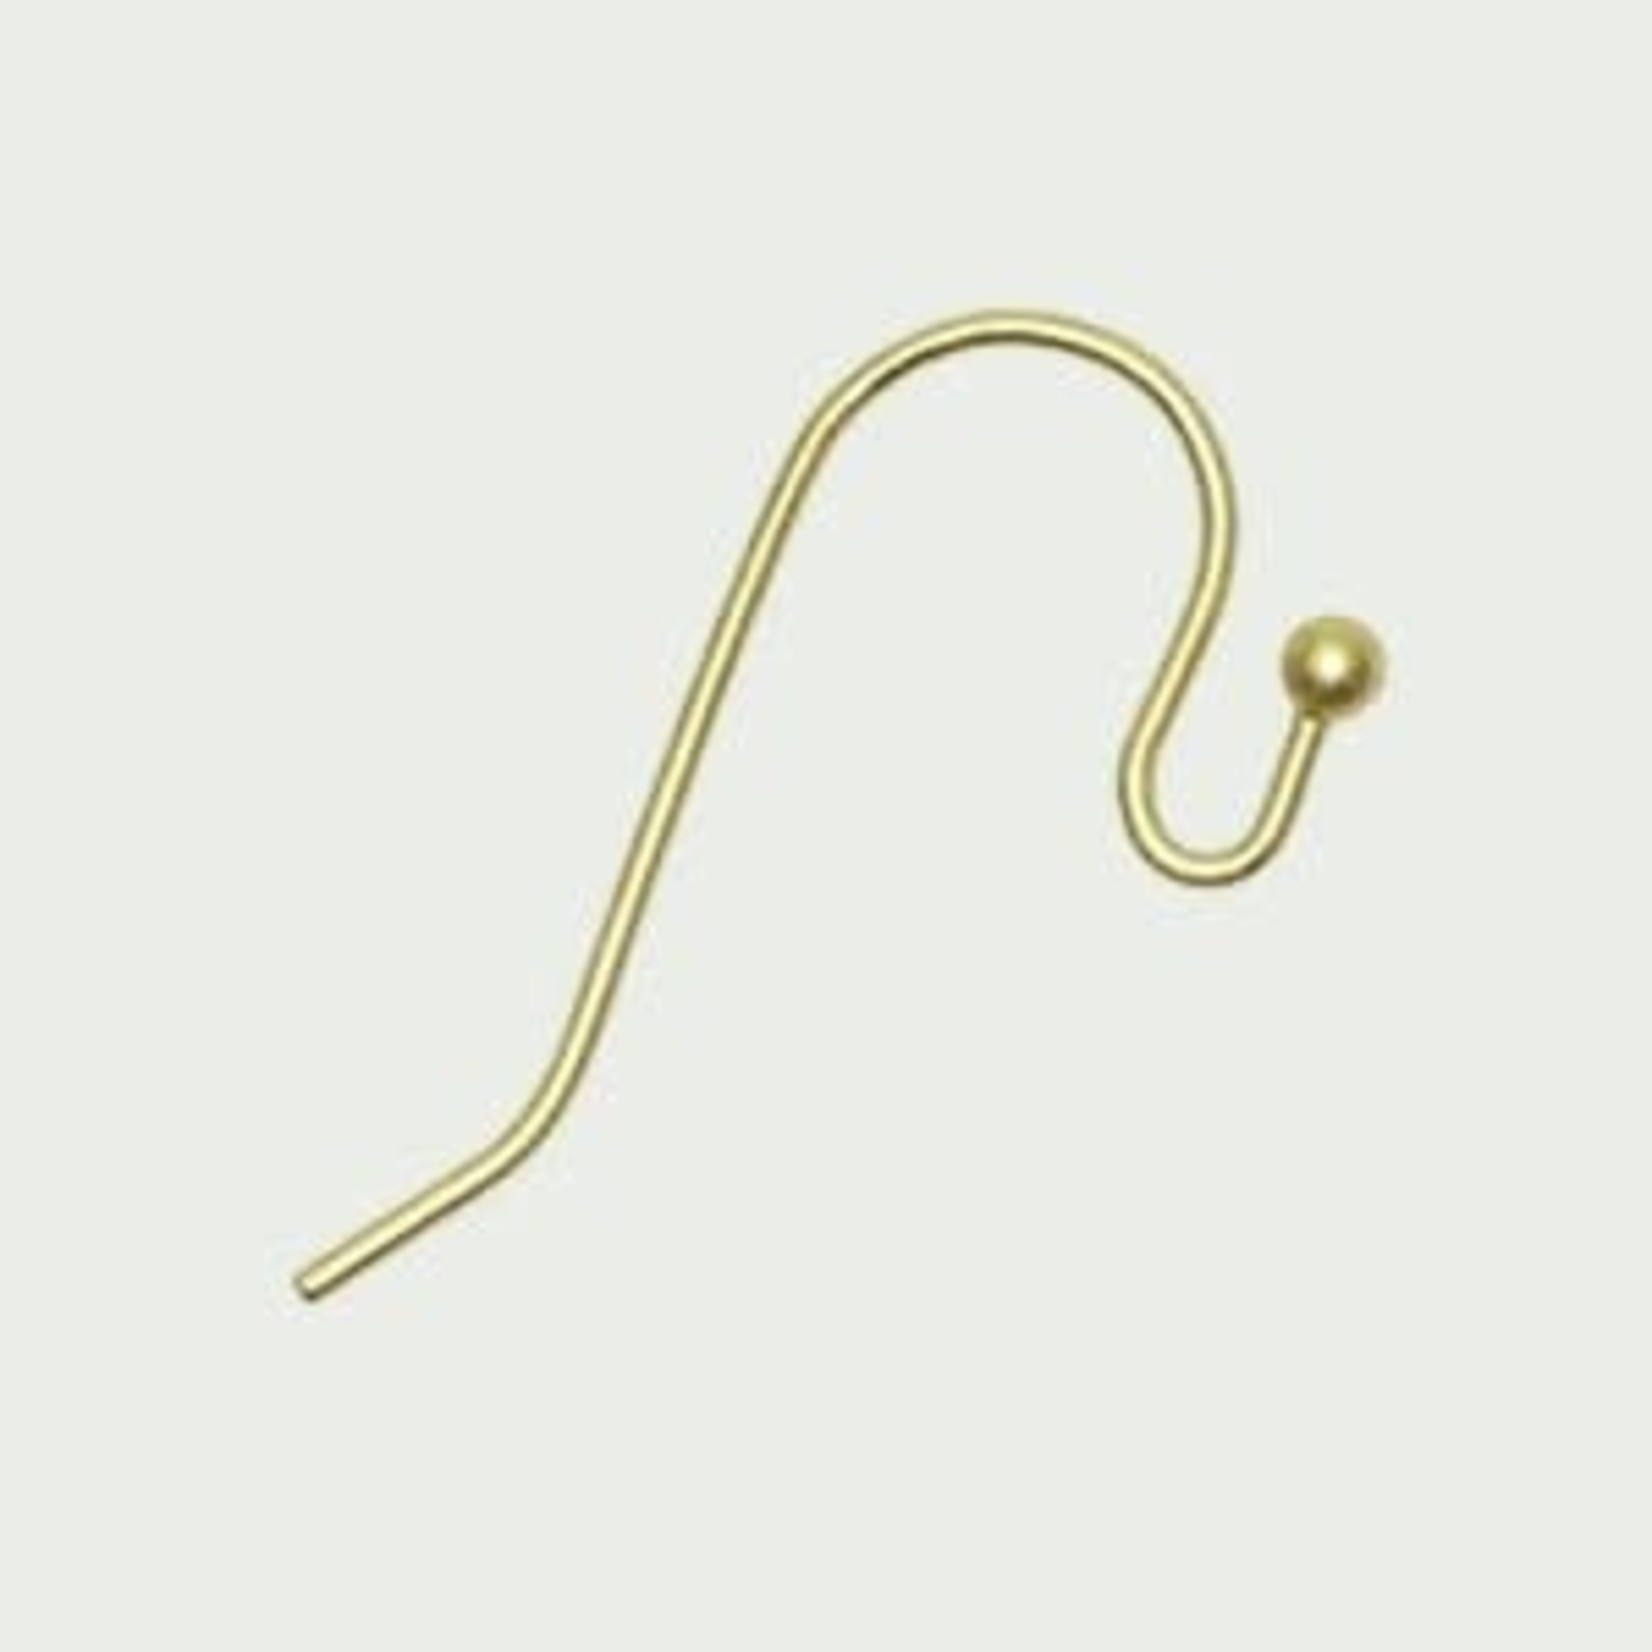 French Earwire Nickel-Free Satin Gold Plated - 50 pieces - Bead